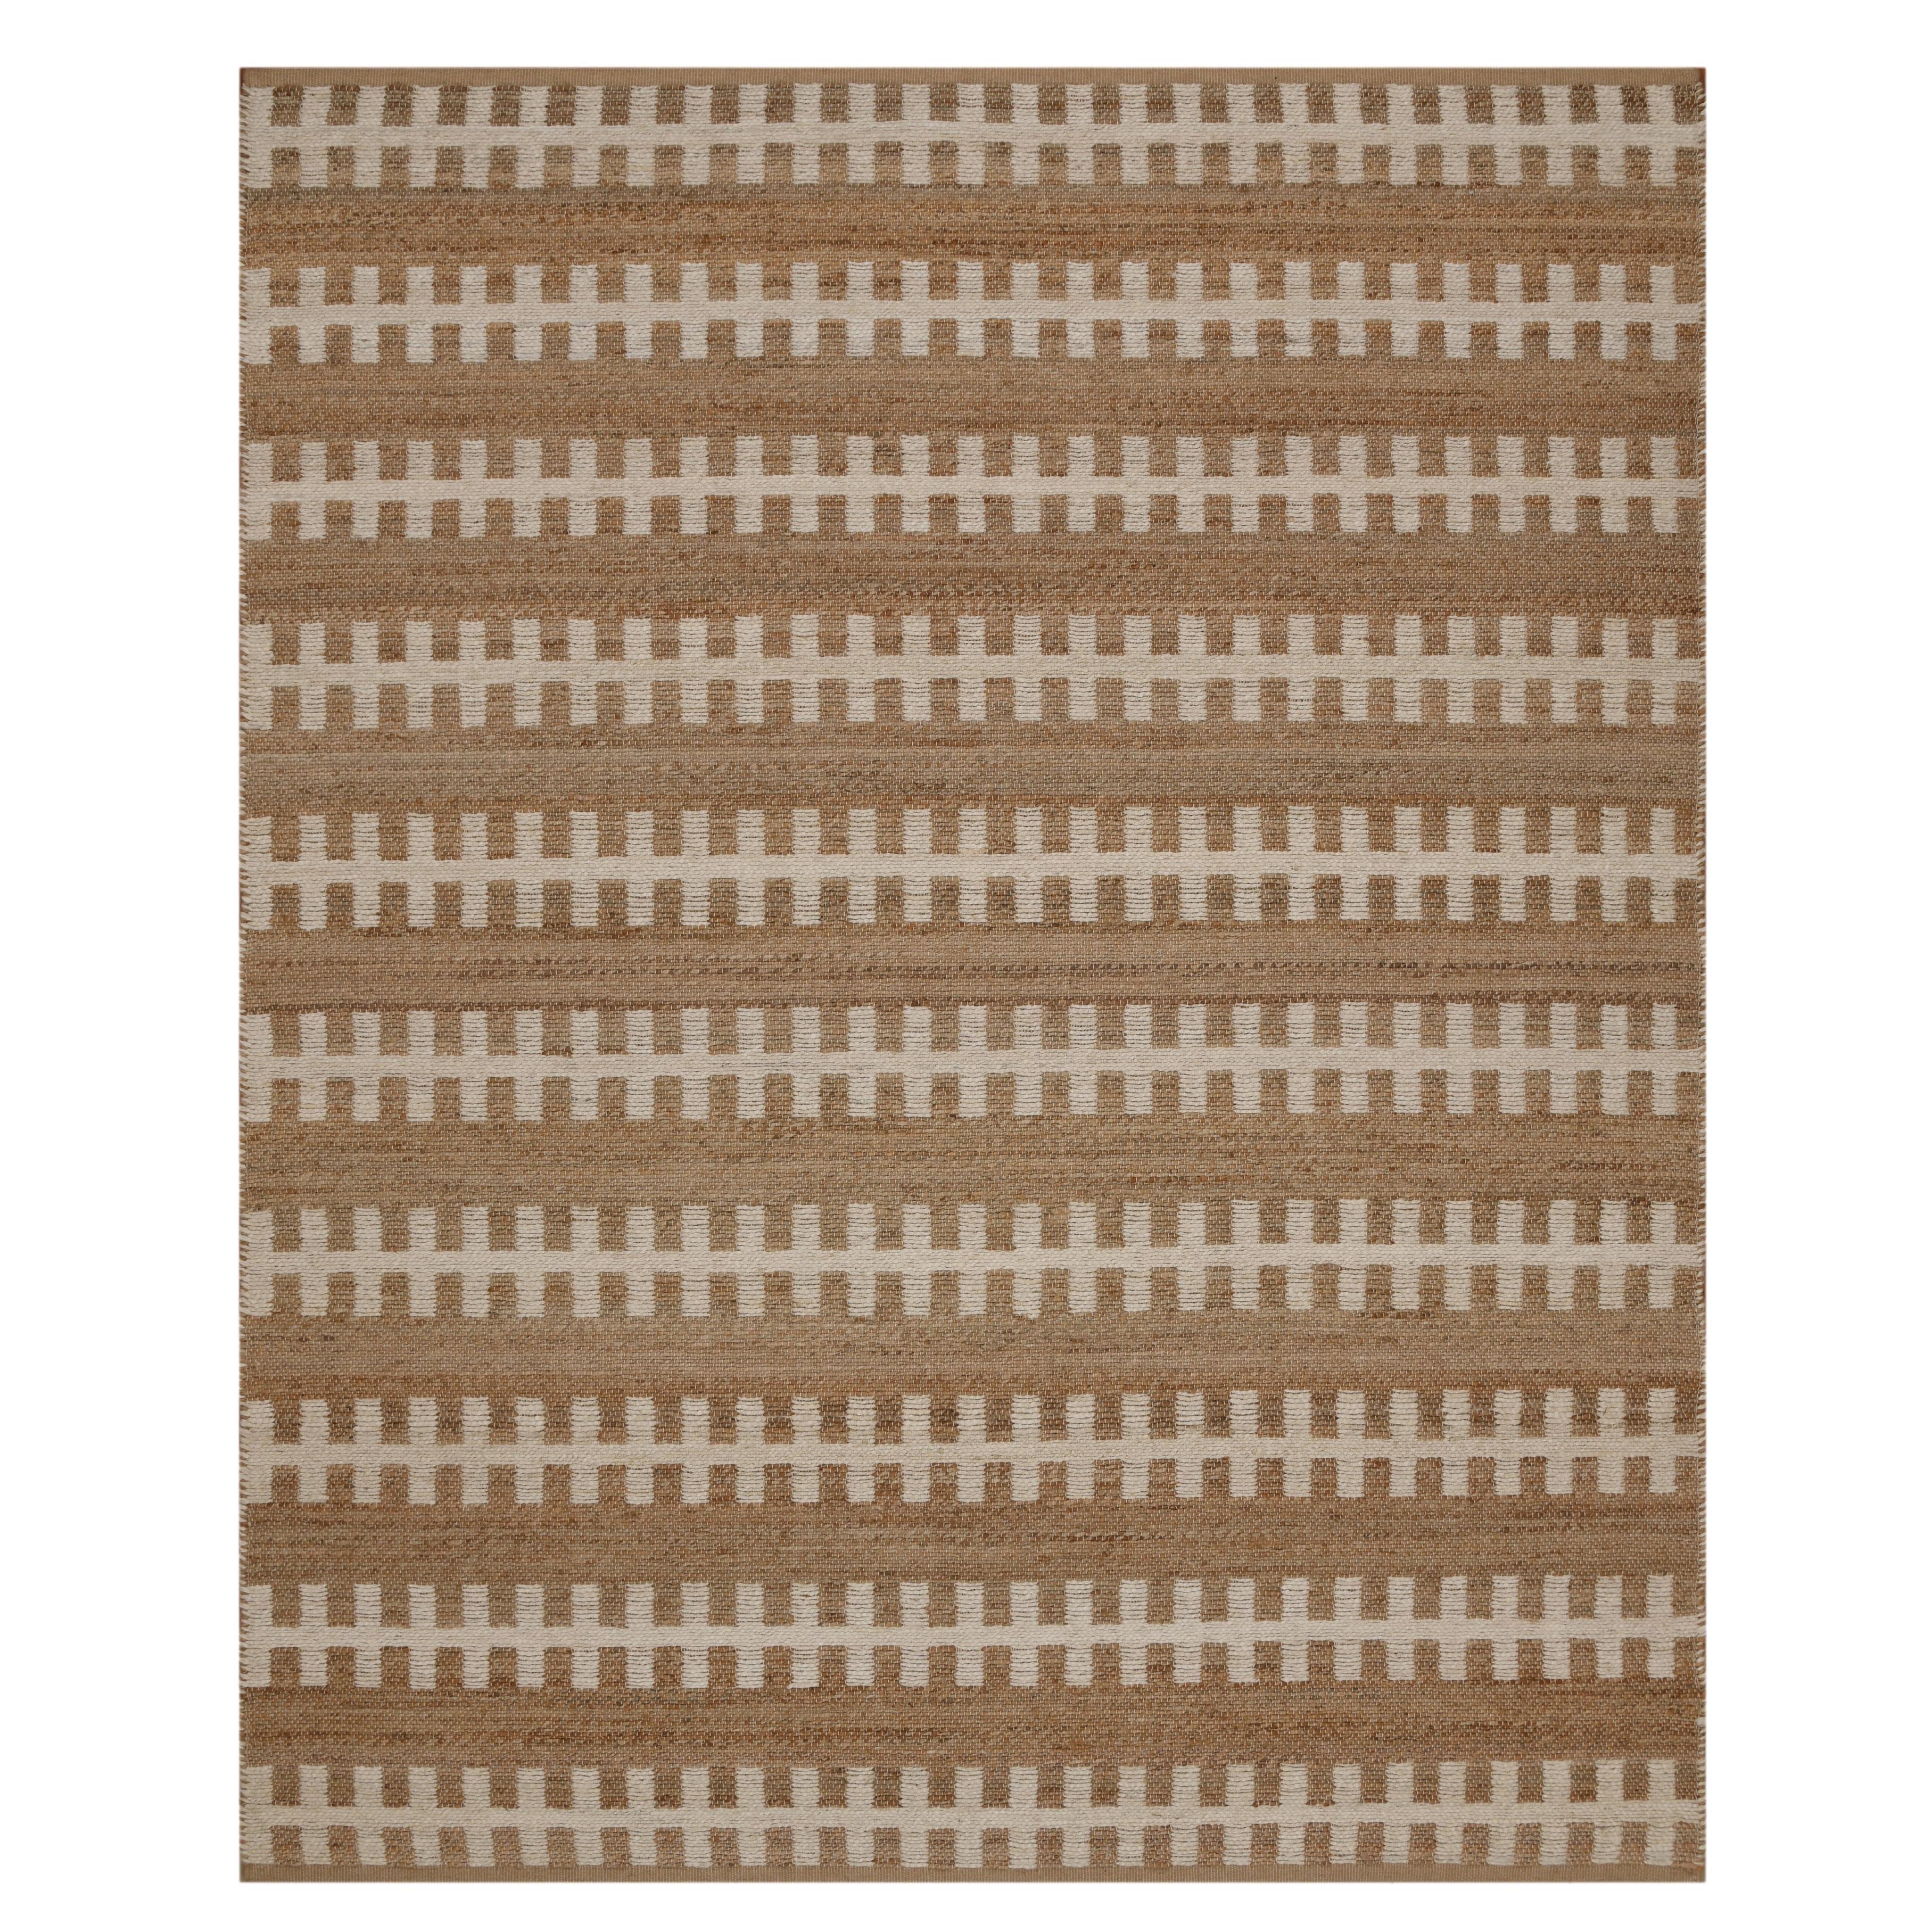 Origo calms the restless craving to rise or ascend and brings with it an inspiration for something new. Woven from 100% handspun jute, Origoís fortitude is echoed thoughtfully through the strength in its simplicity.